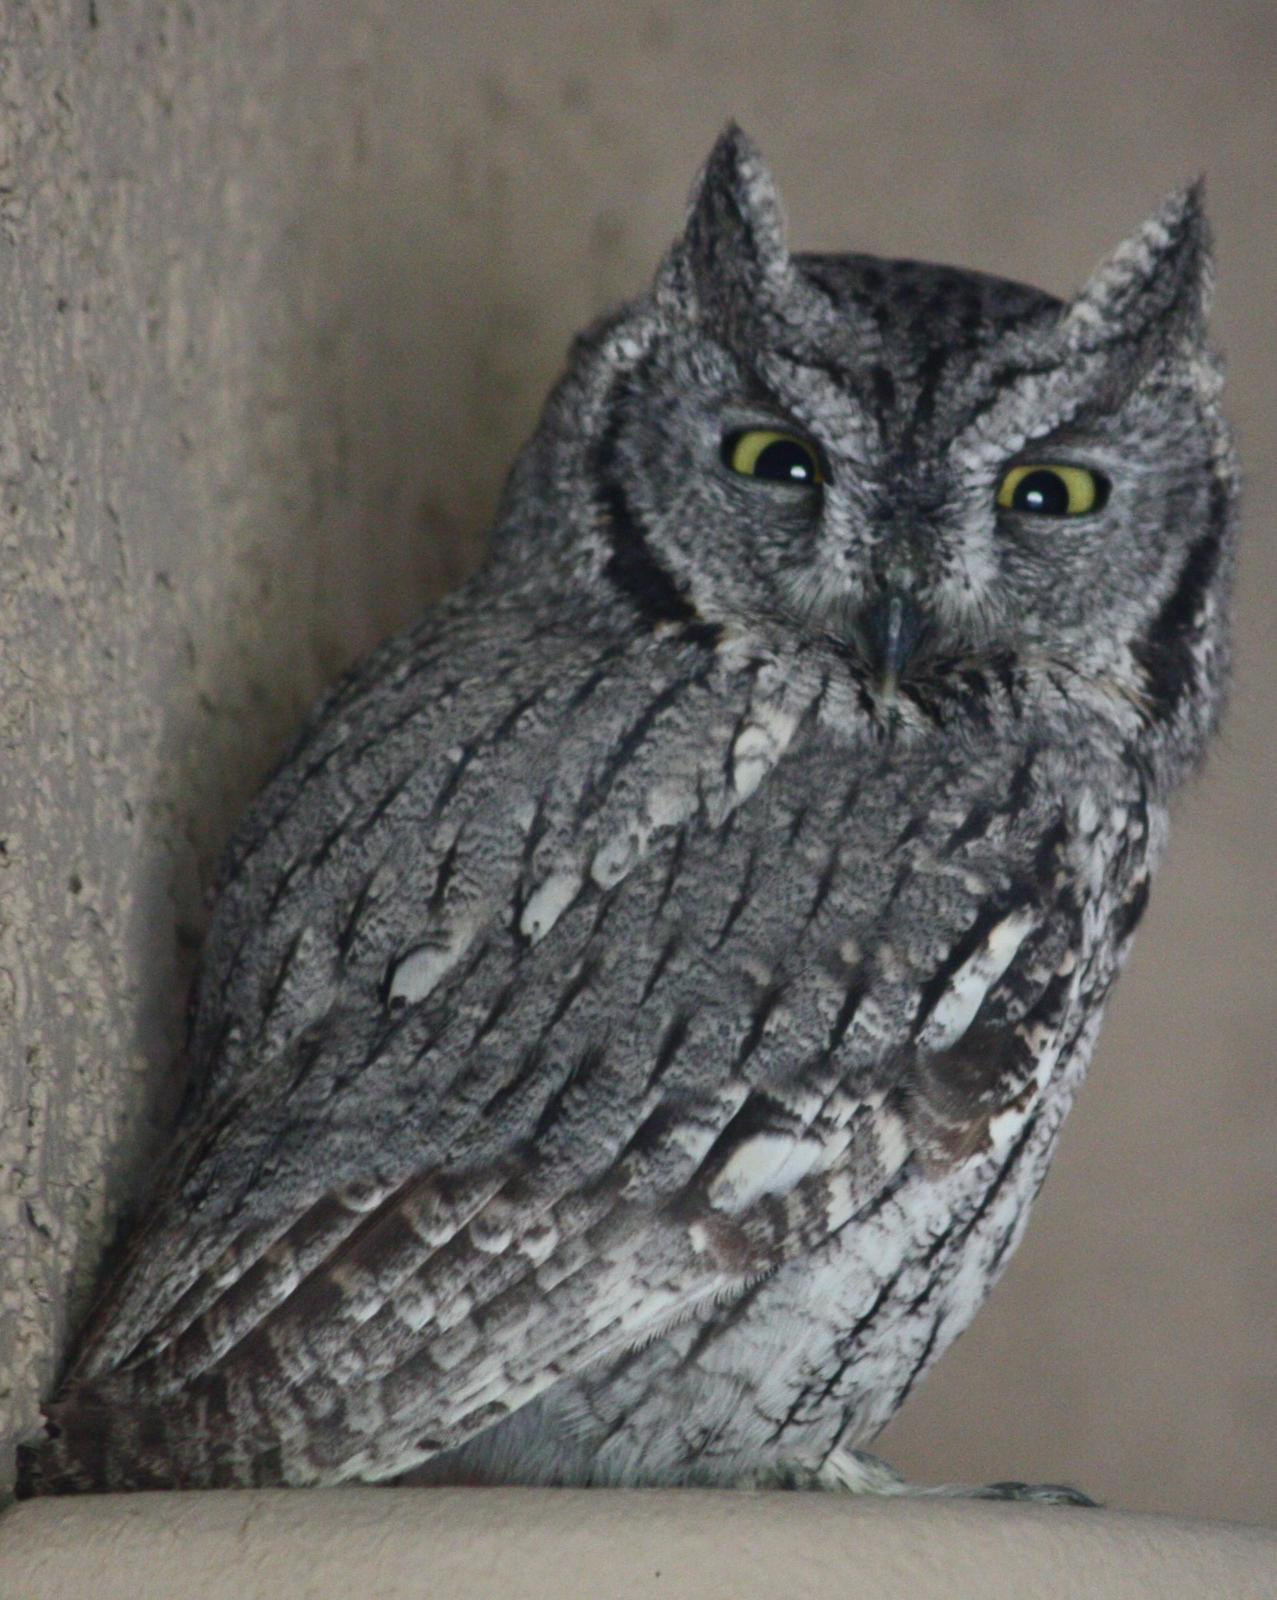 Western Screech-Owl Photo by Andrew Core